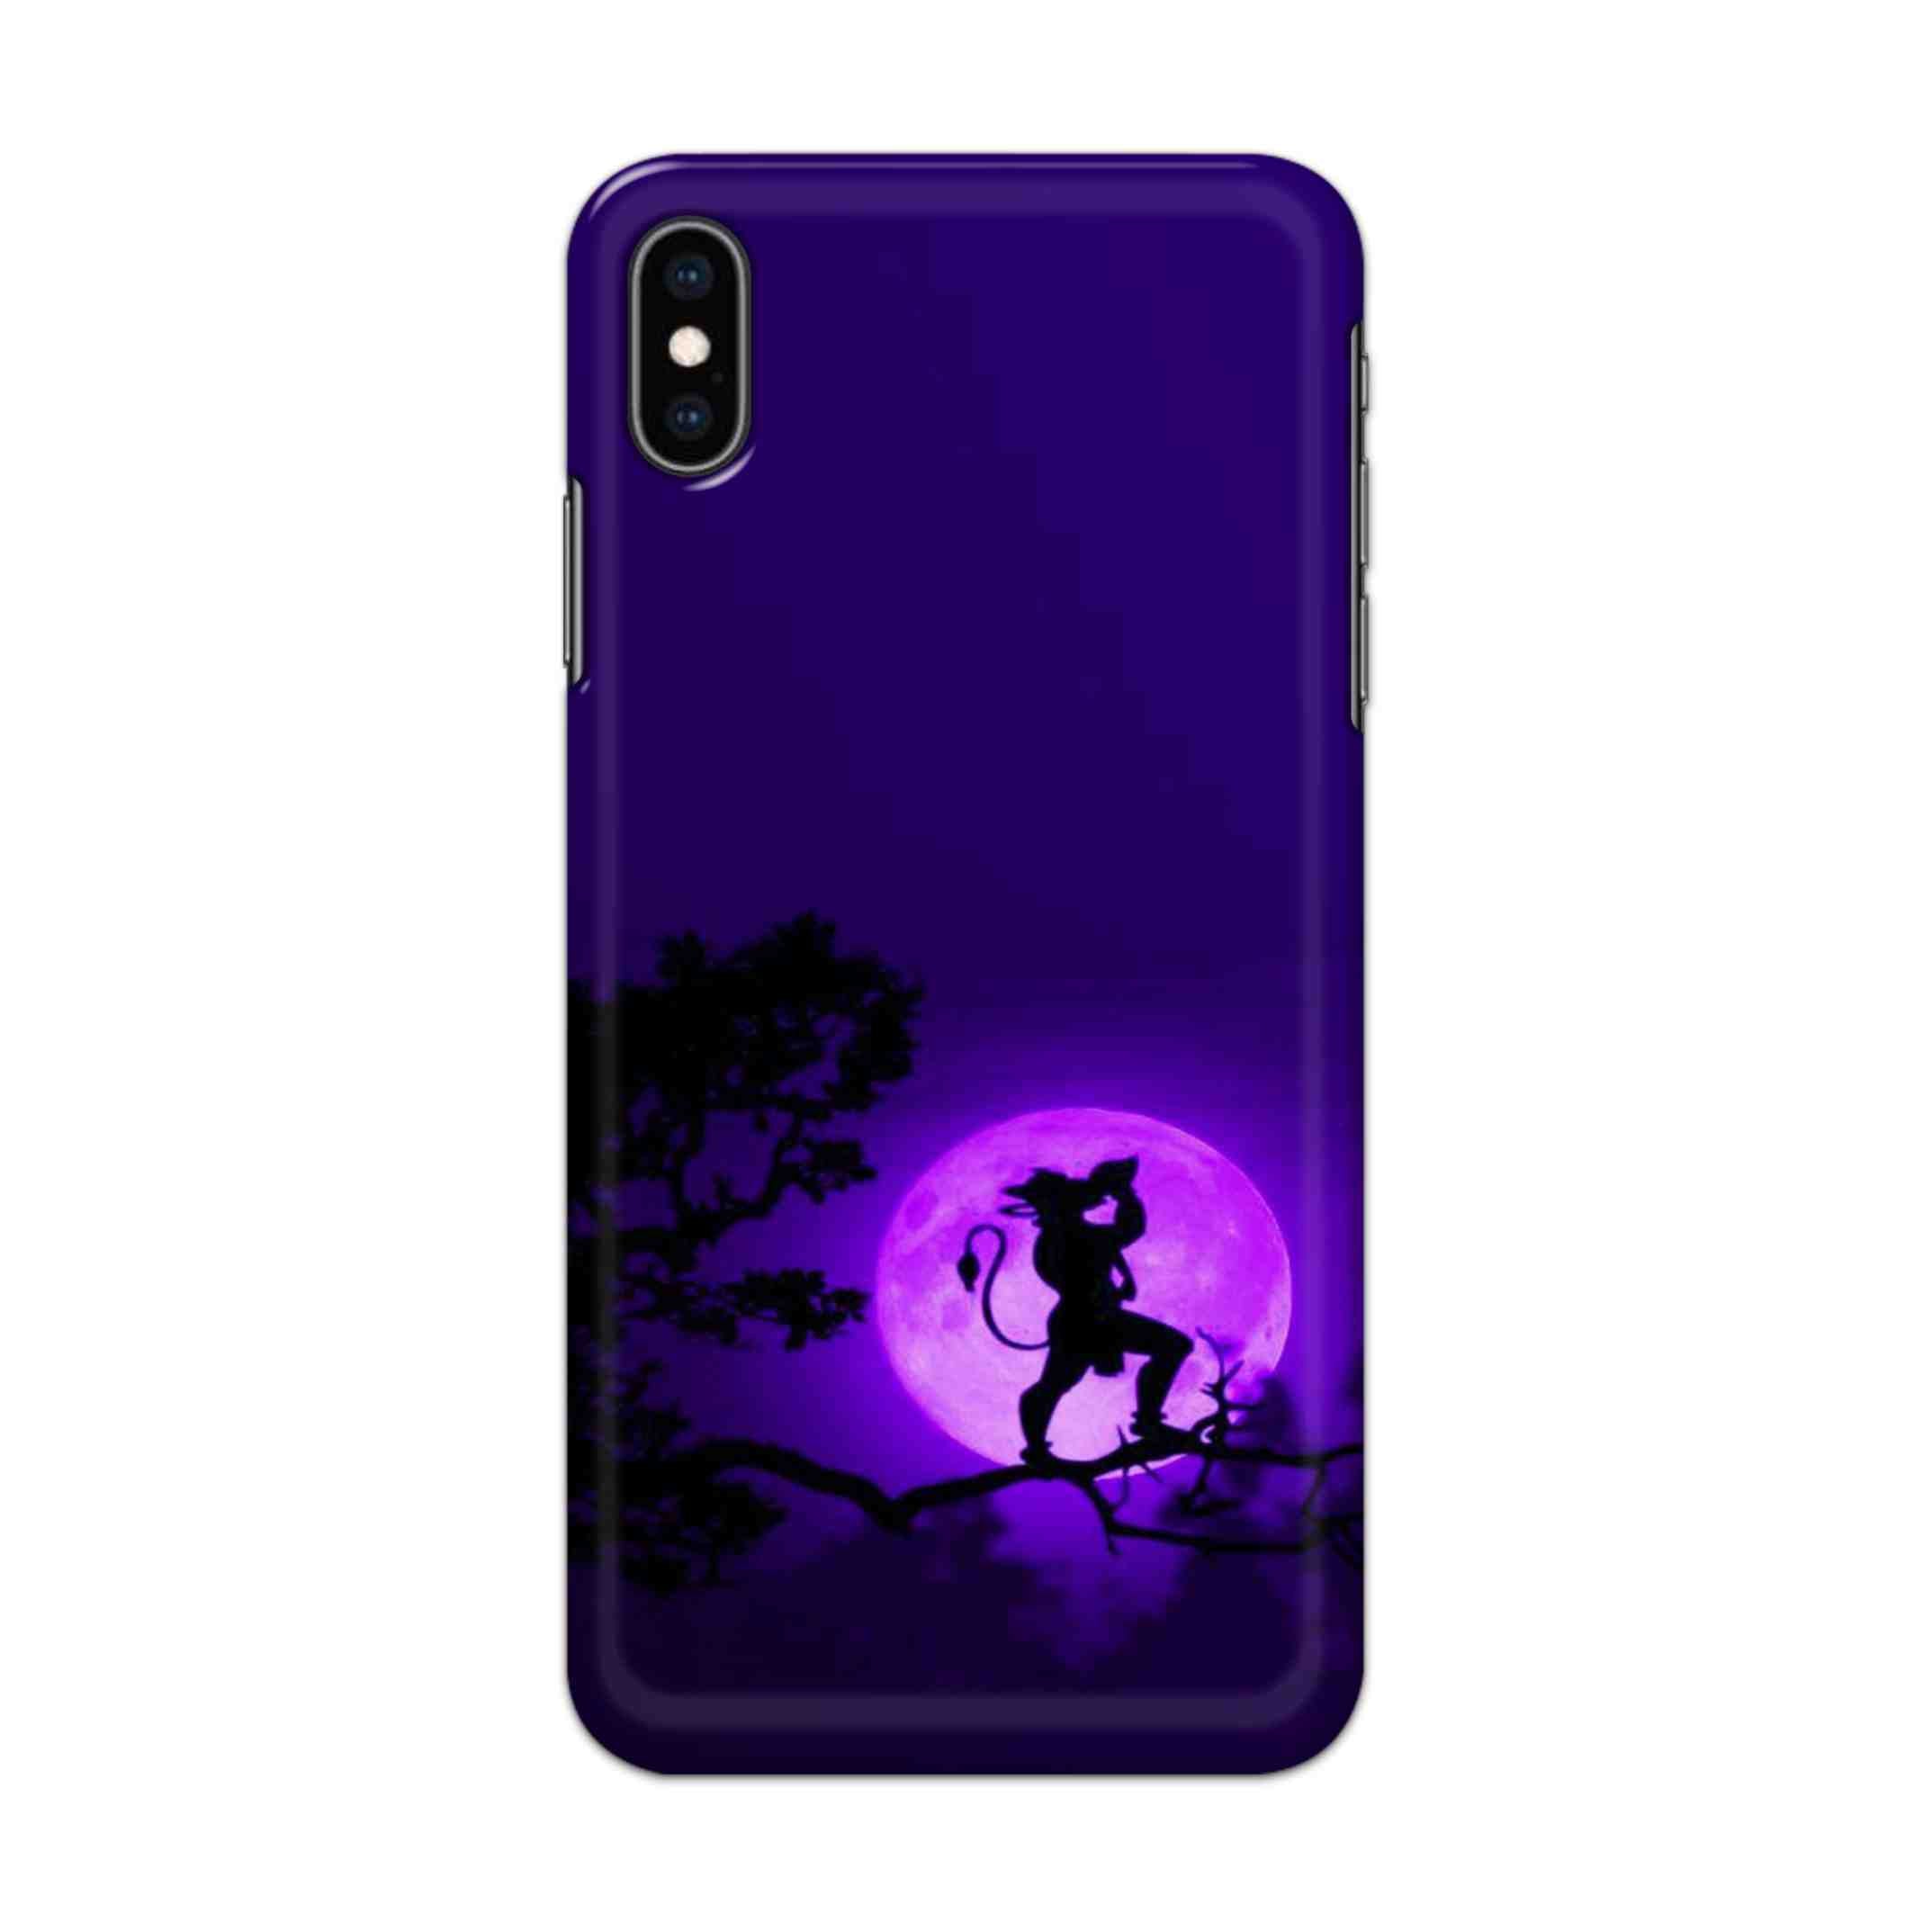 Buy Hanuman Hard Back Mobile Phone Case/Cover For iPhone XS MAX Online